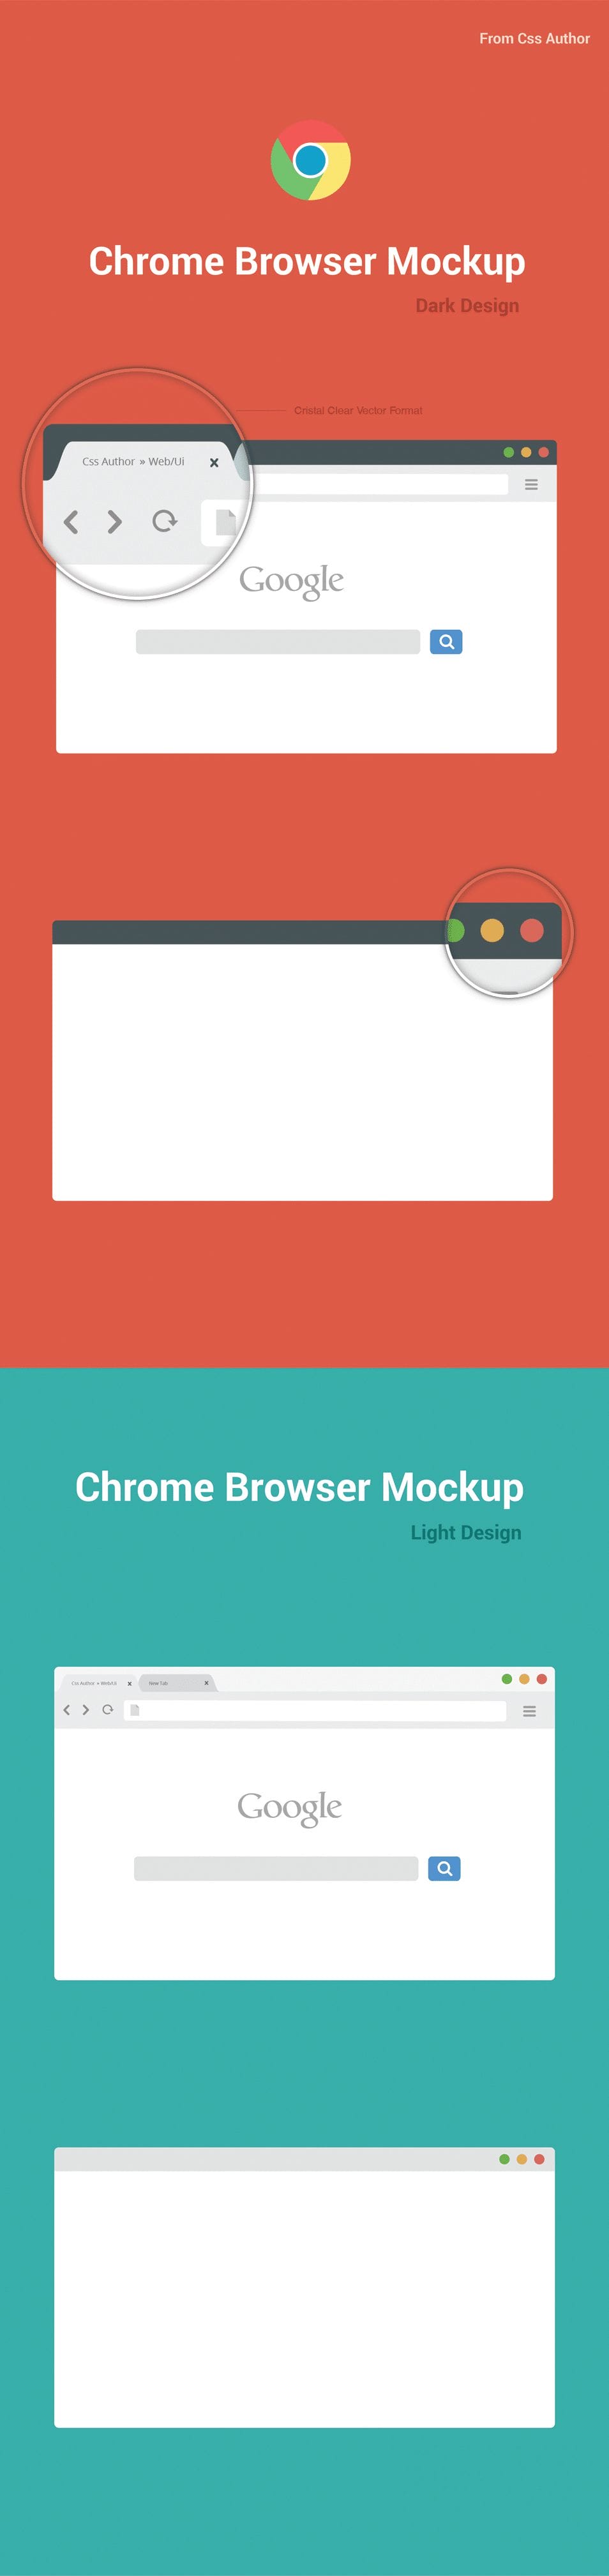 Free Chrome Browser Mockup Design Template – Vector